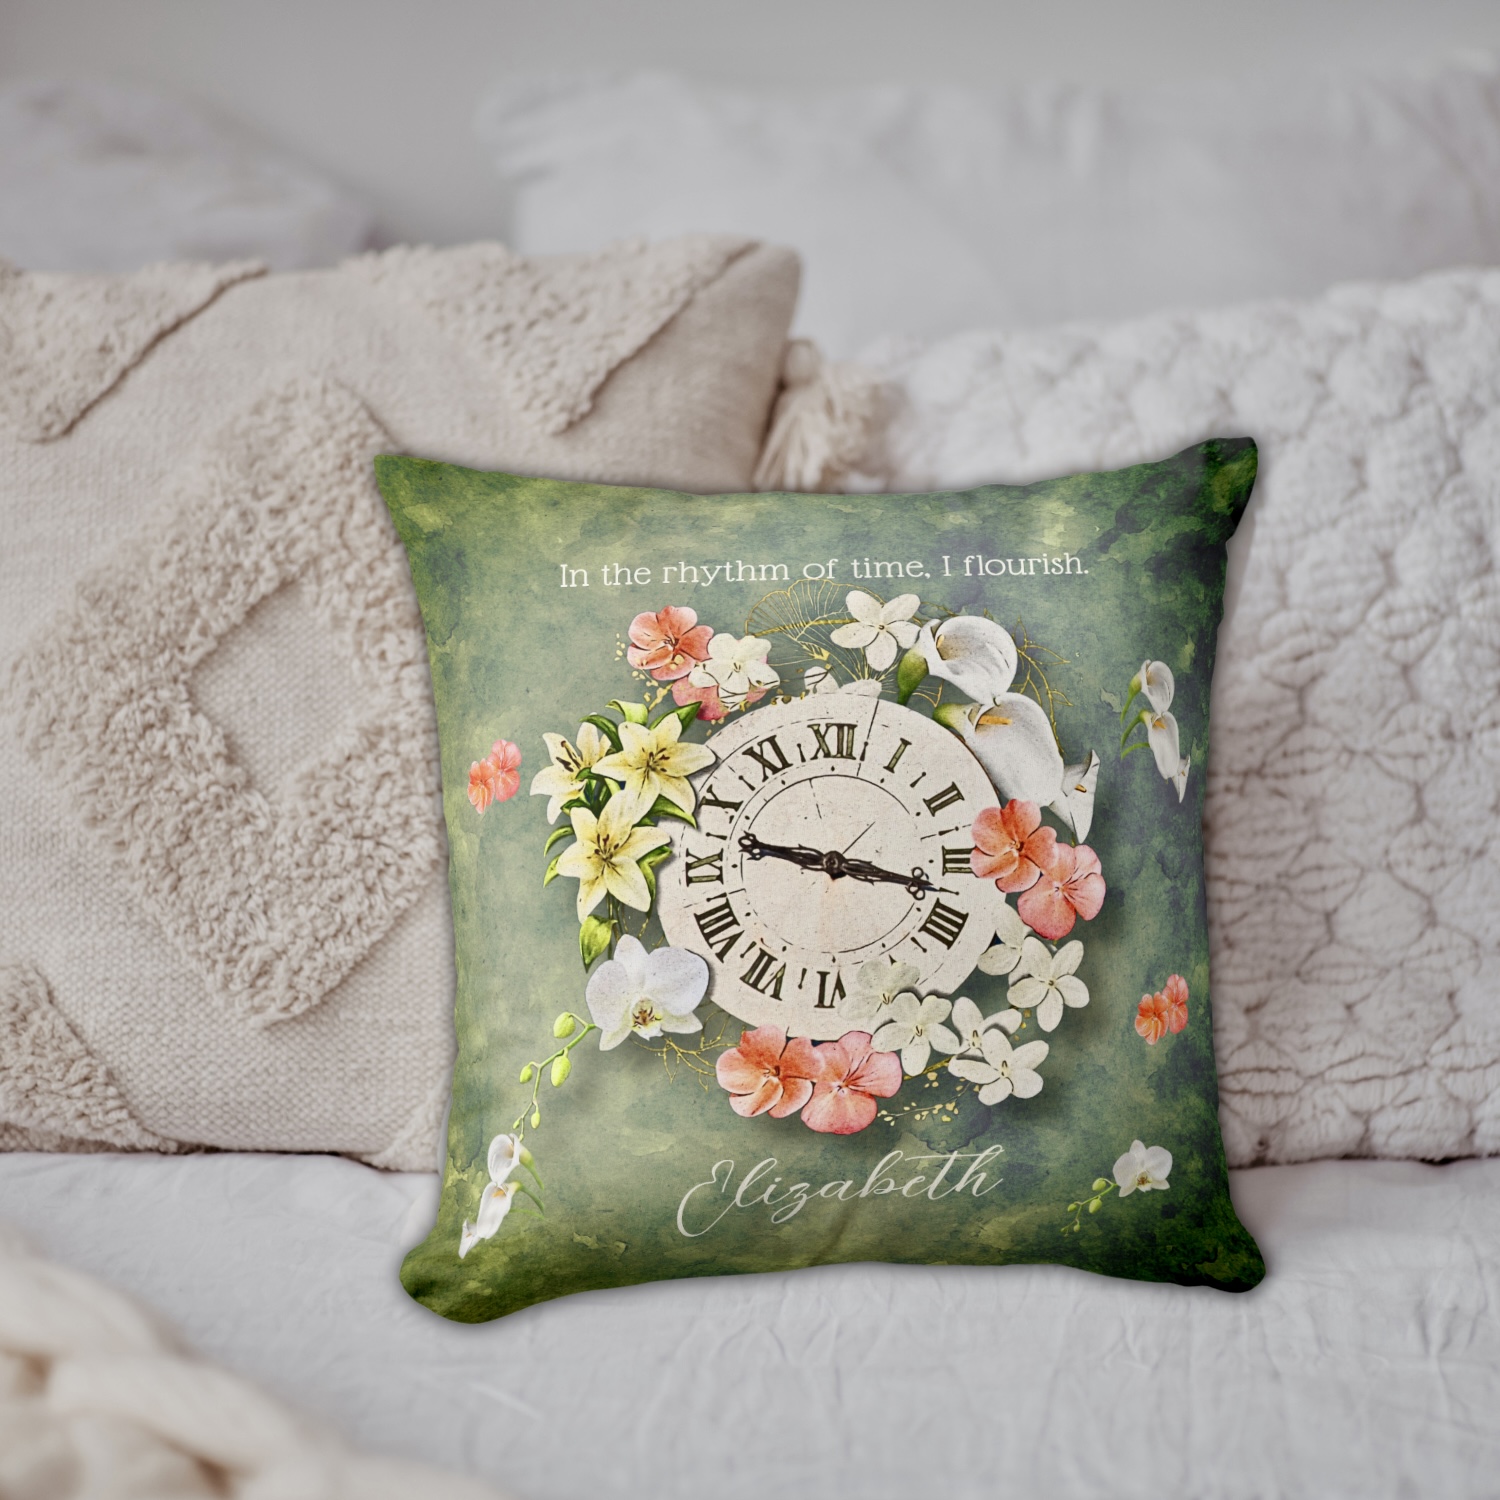 Moss green throw pillow with Victorian clock at the center and soft white, yellow and peach color flowers. Includes an inspirational message and space for name personalization.